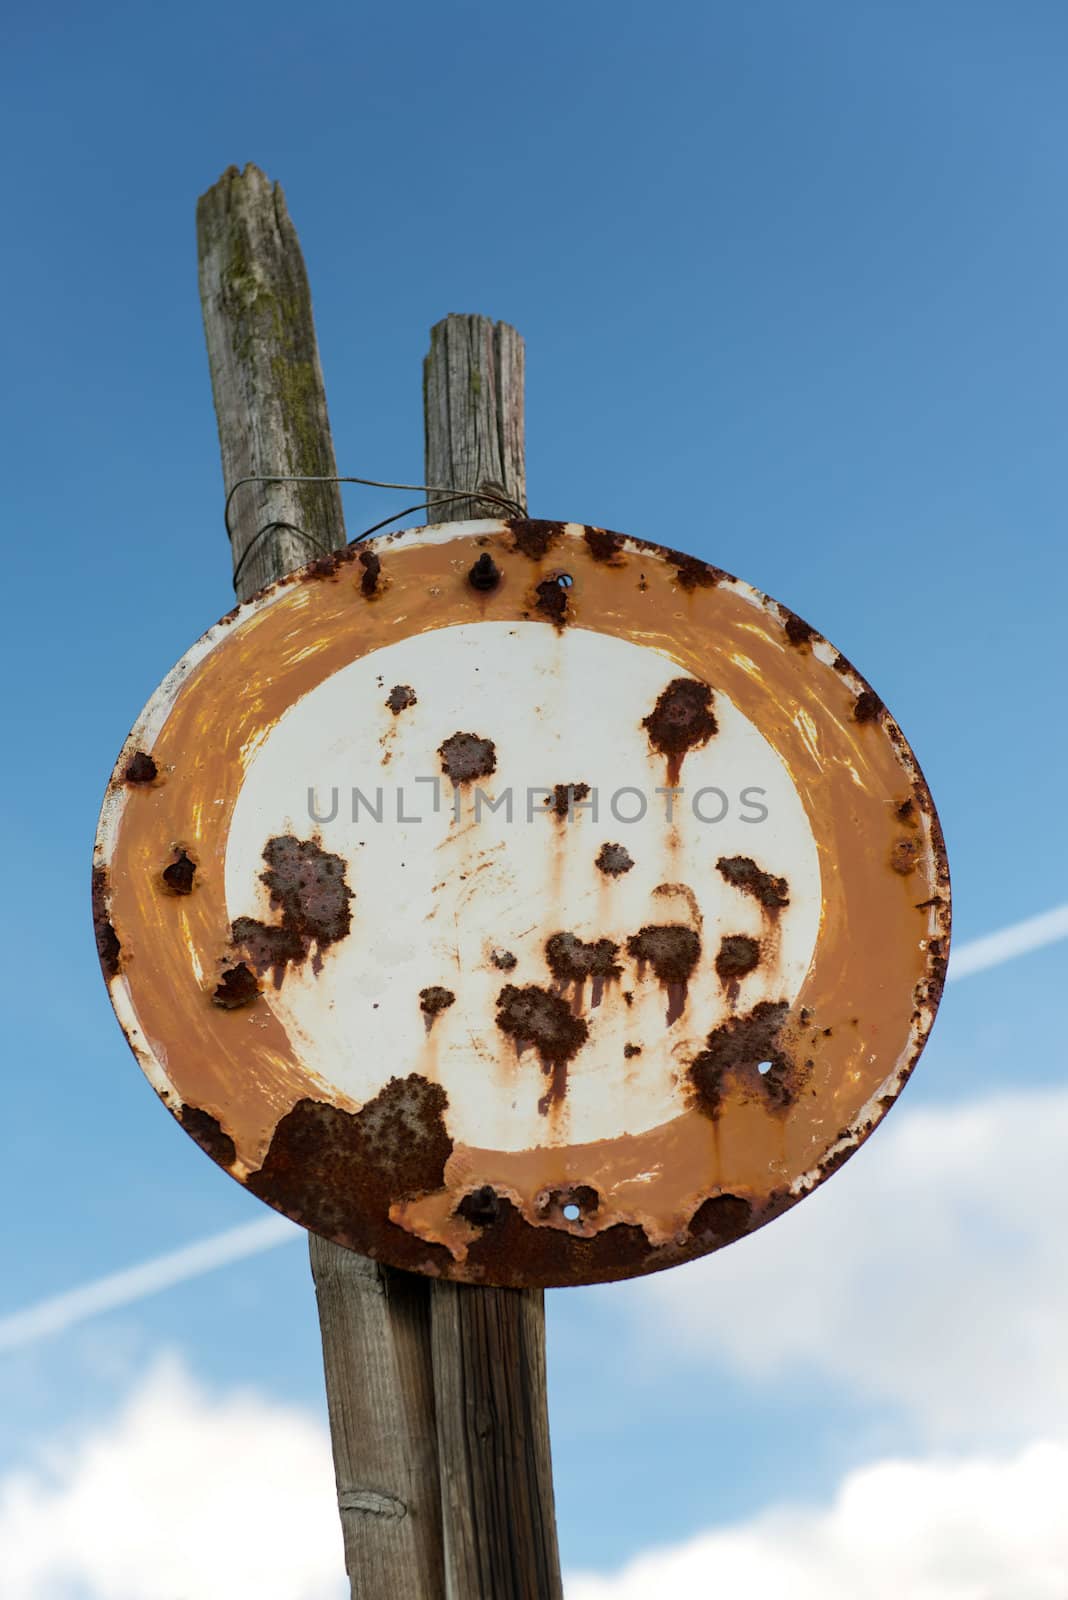 Rusty Old No Vehicles Traffic Sign Against The Blue Sky